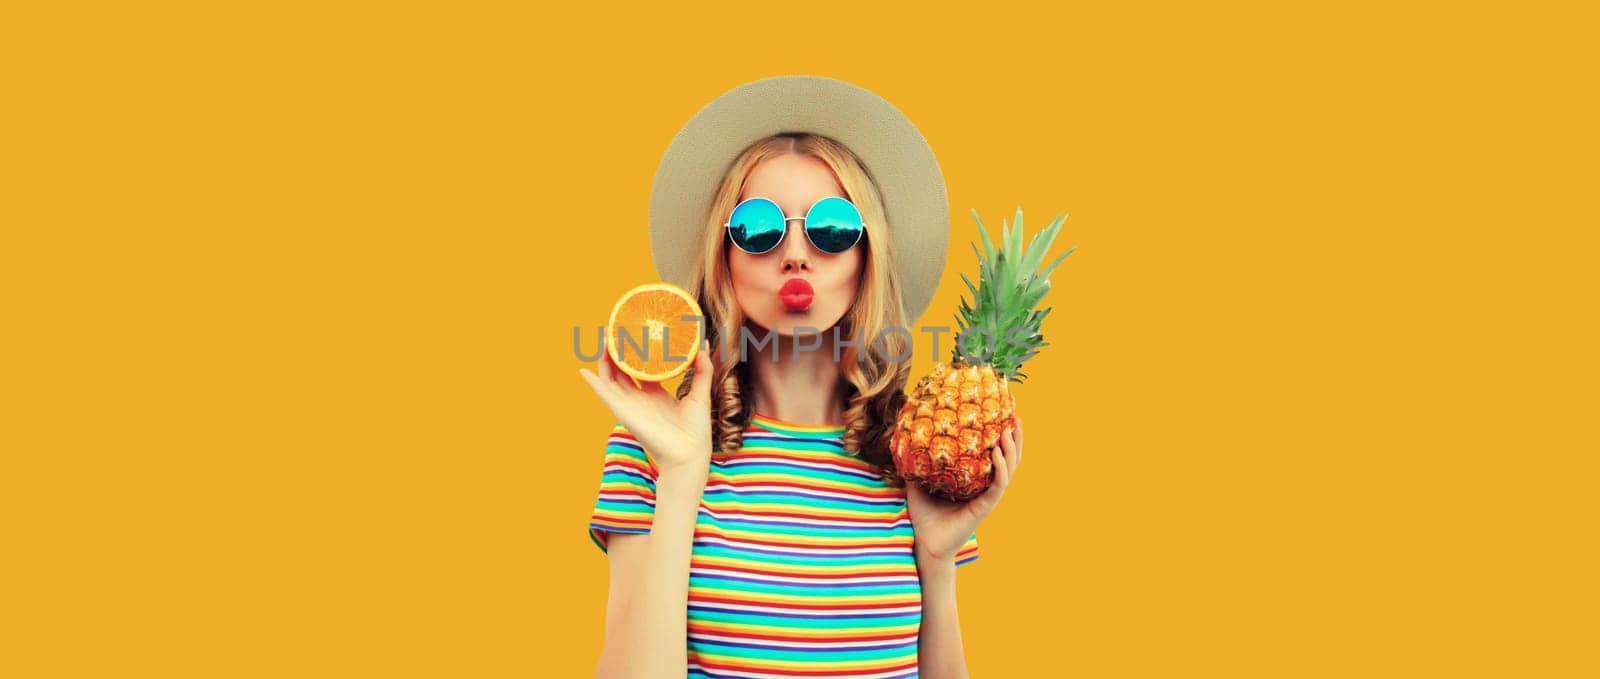 Summer portrait of happy young woman with pineapple, slice of orange, fresh tropical juicy fruits, straw hat, sunglasses on yellow background